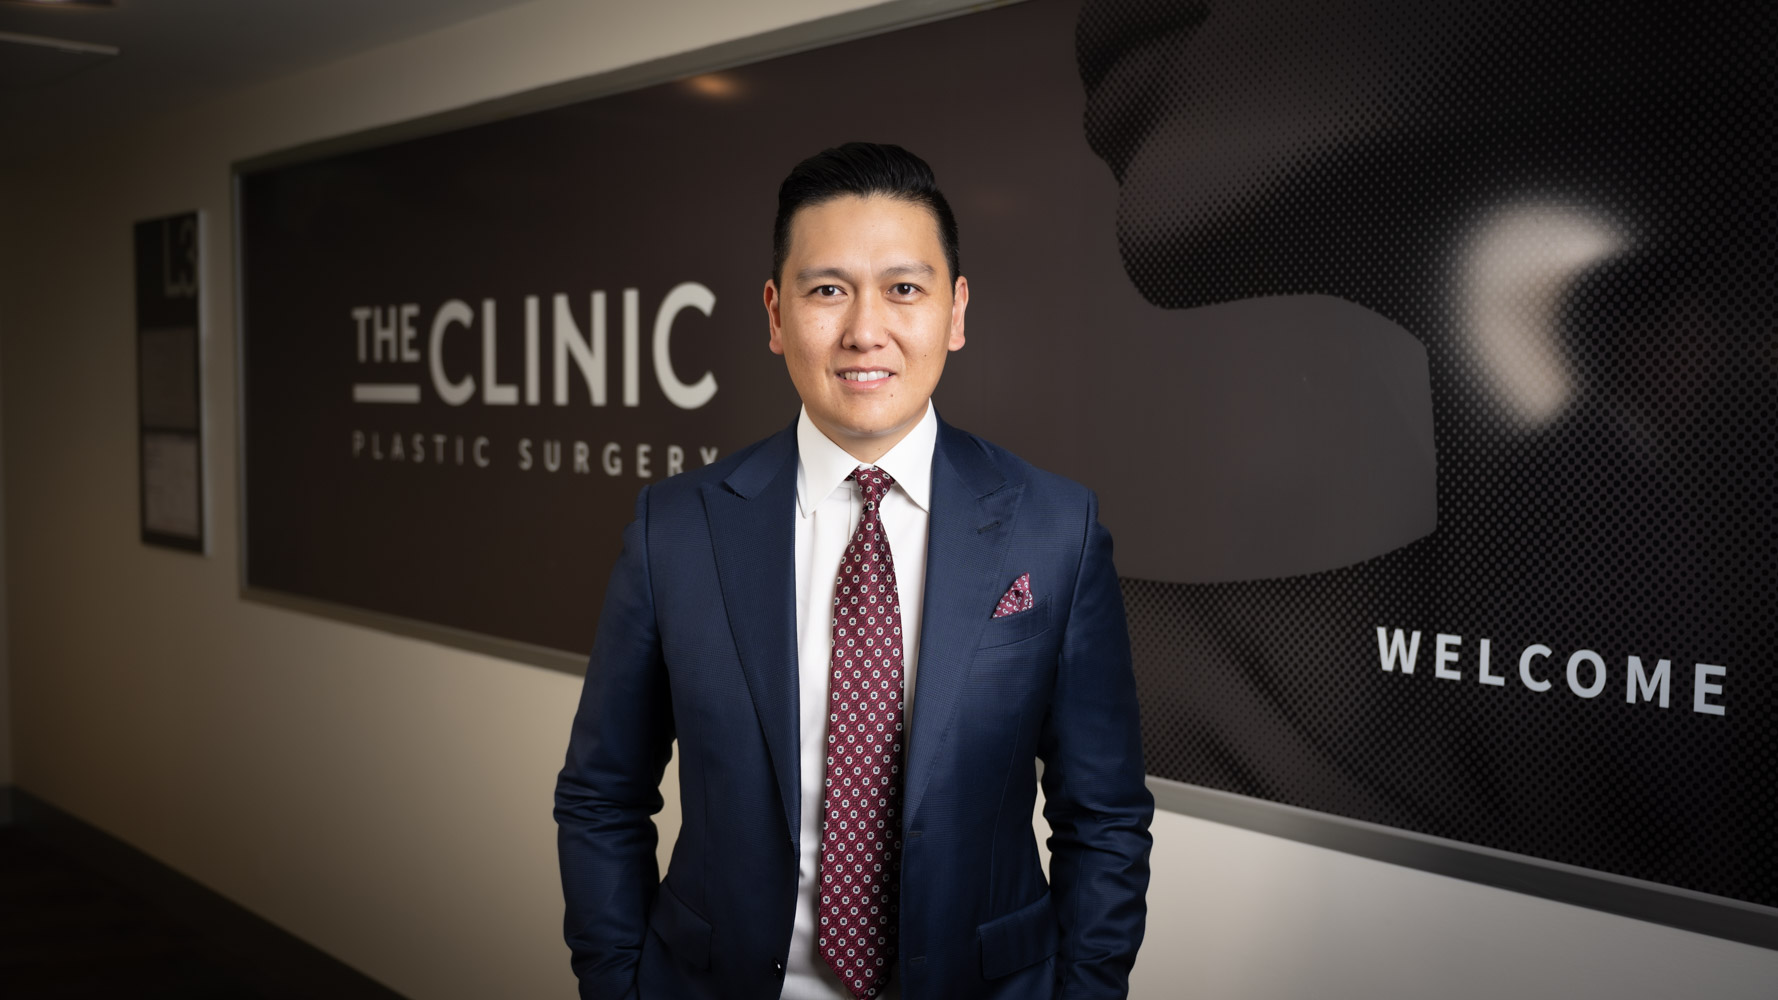 Plastic Surgeon, The Clinic Plastic Surgery, Breast Reconstruction, Breast Reduction, Breast Augmentation, Breast Lift, Mastopexy, Skin Cancer Surgery, Hand Surgery